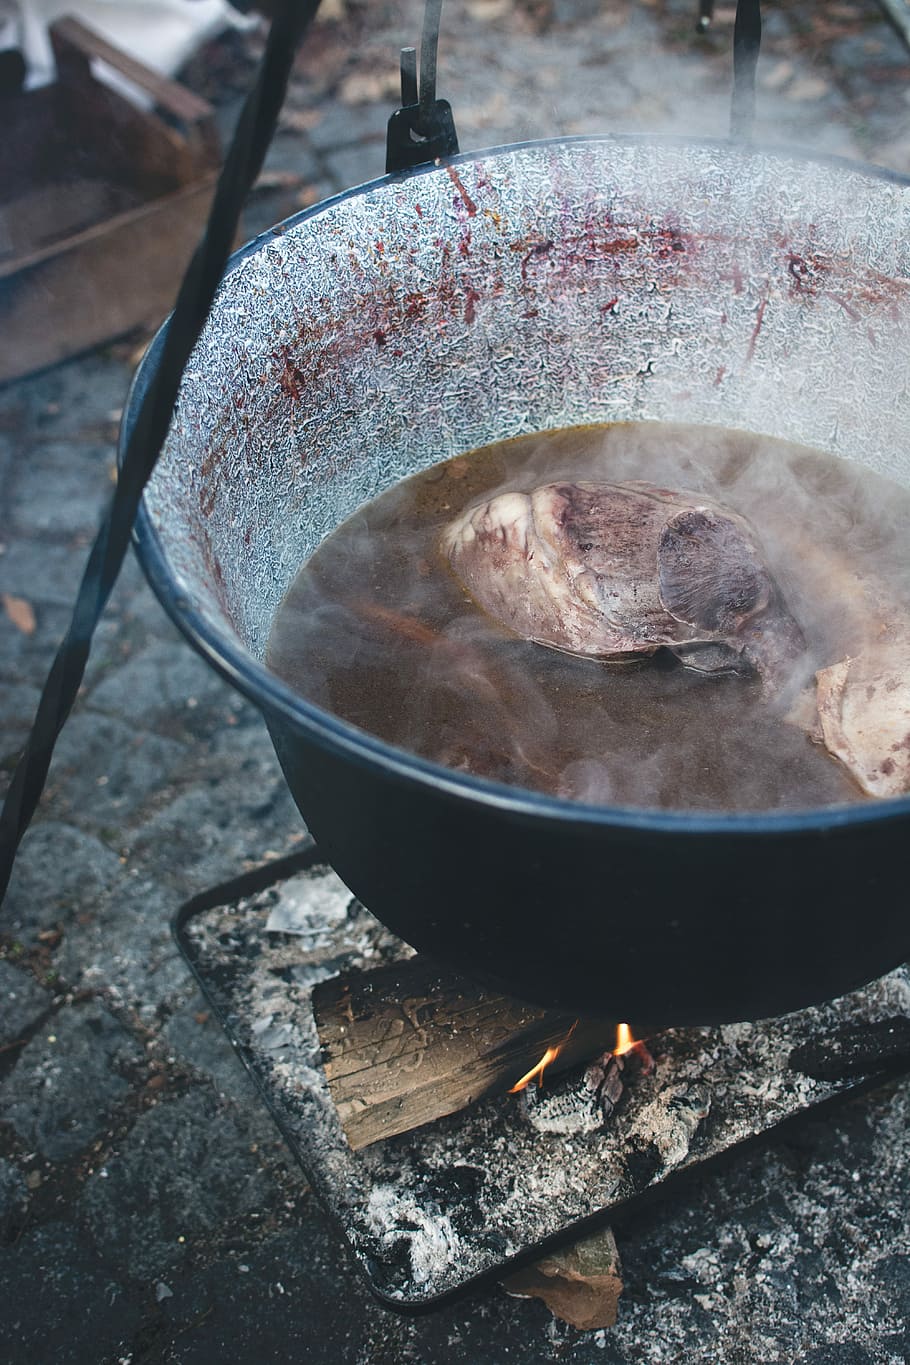 kettle, outside, Cooking, traditional, heat - Temperature, food, fire - Natural Phenomenon, cooking Pan, food and drink, preparation